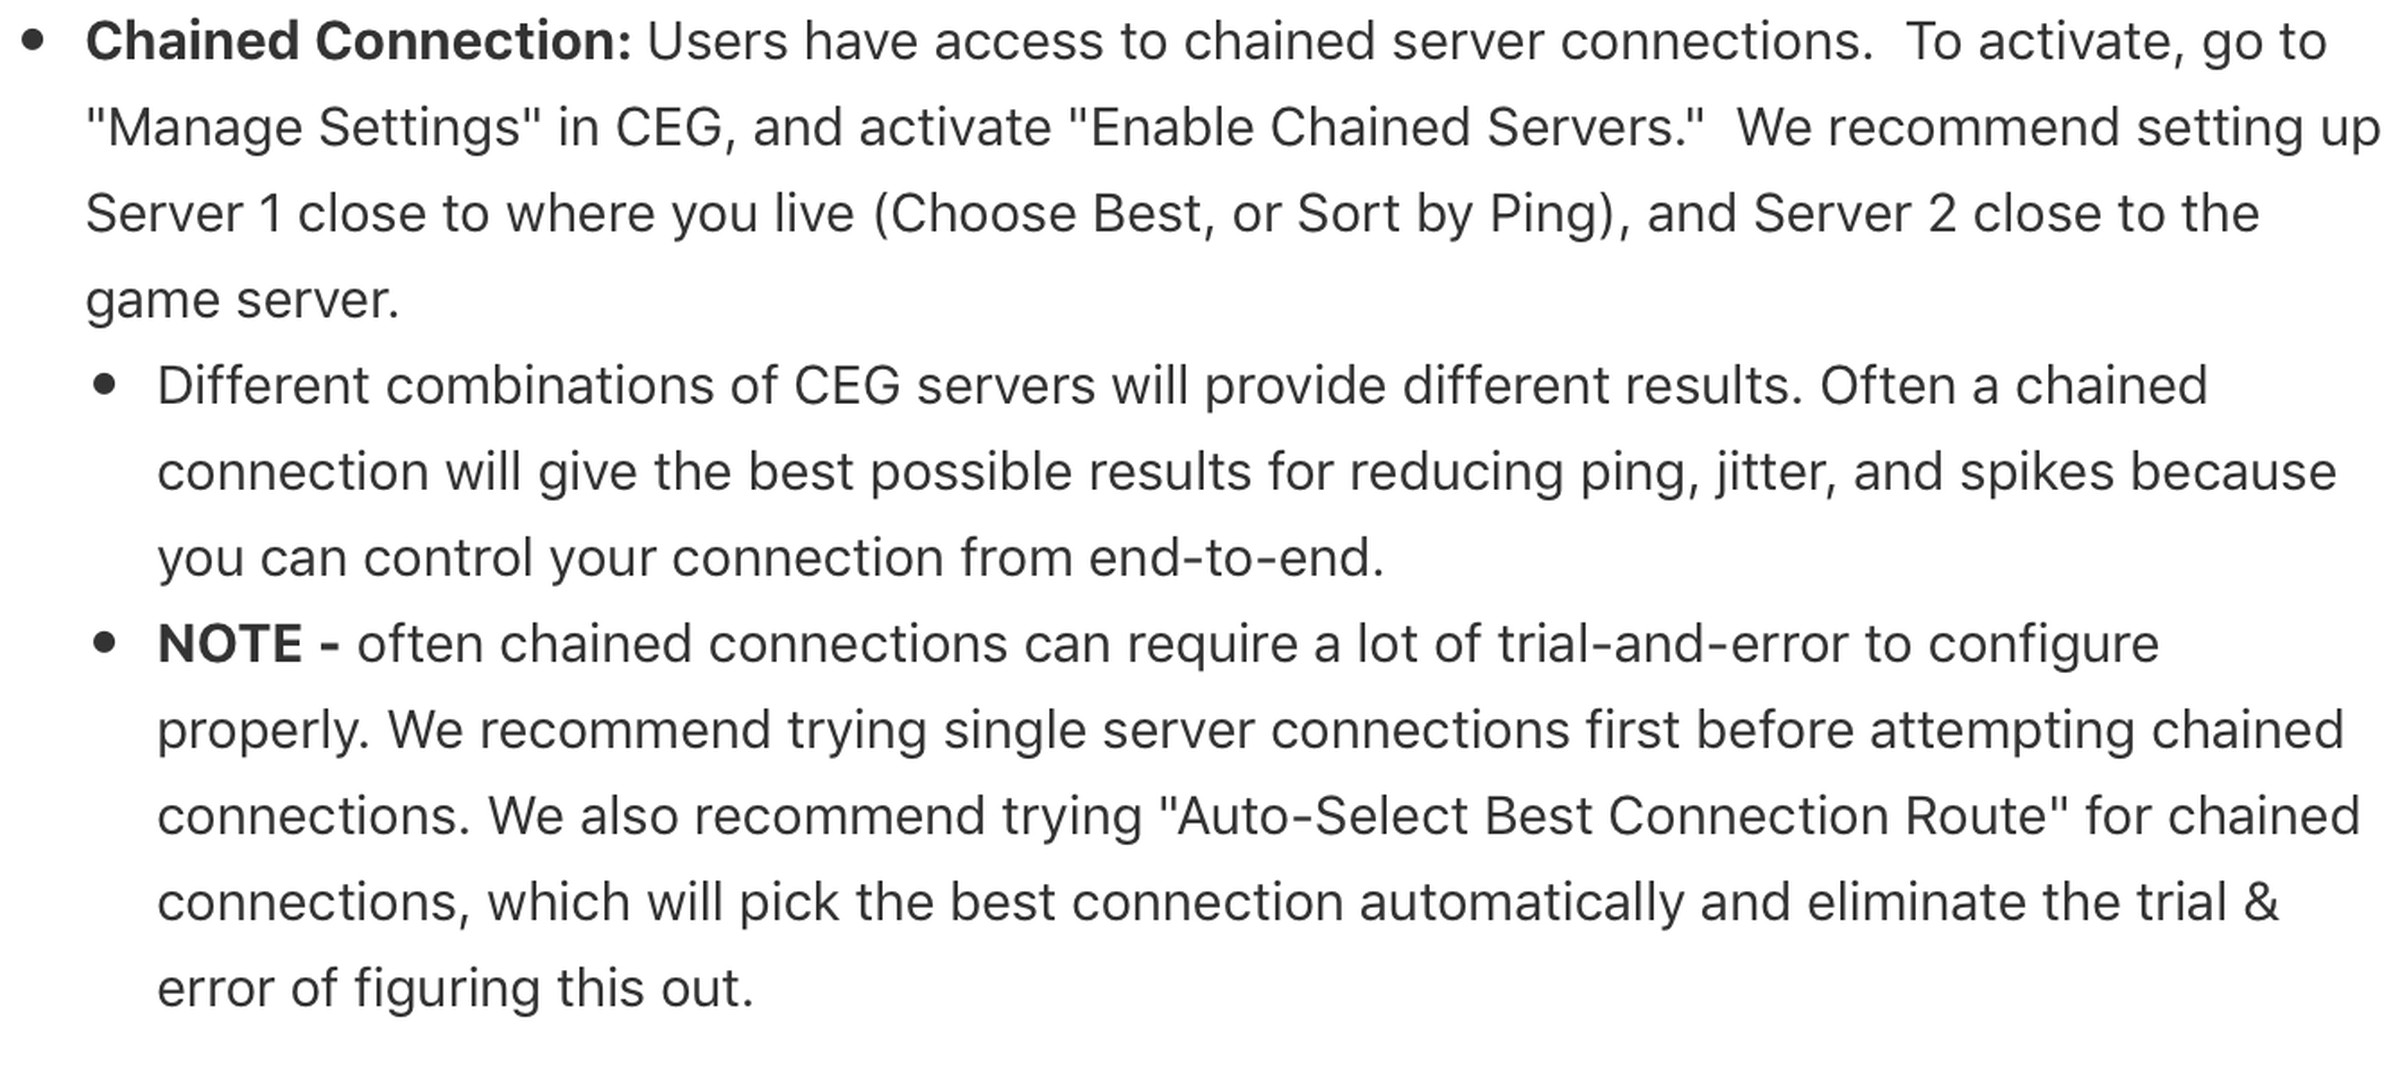 Cox says gamers can control their connection to a server from end to end.